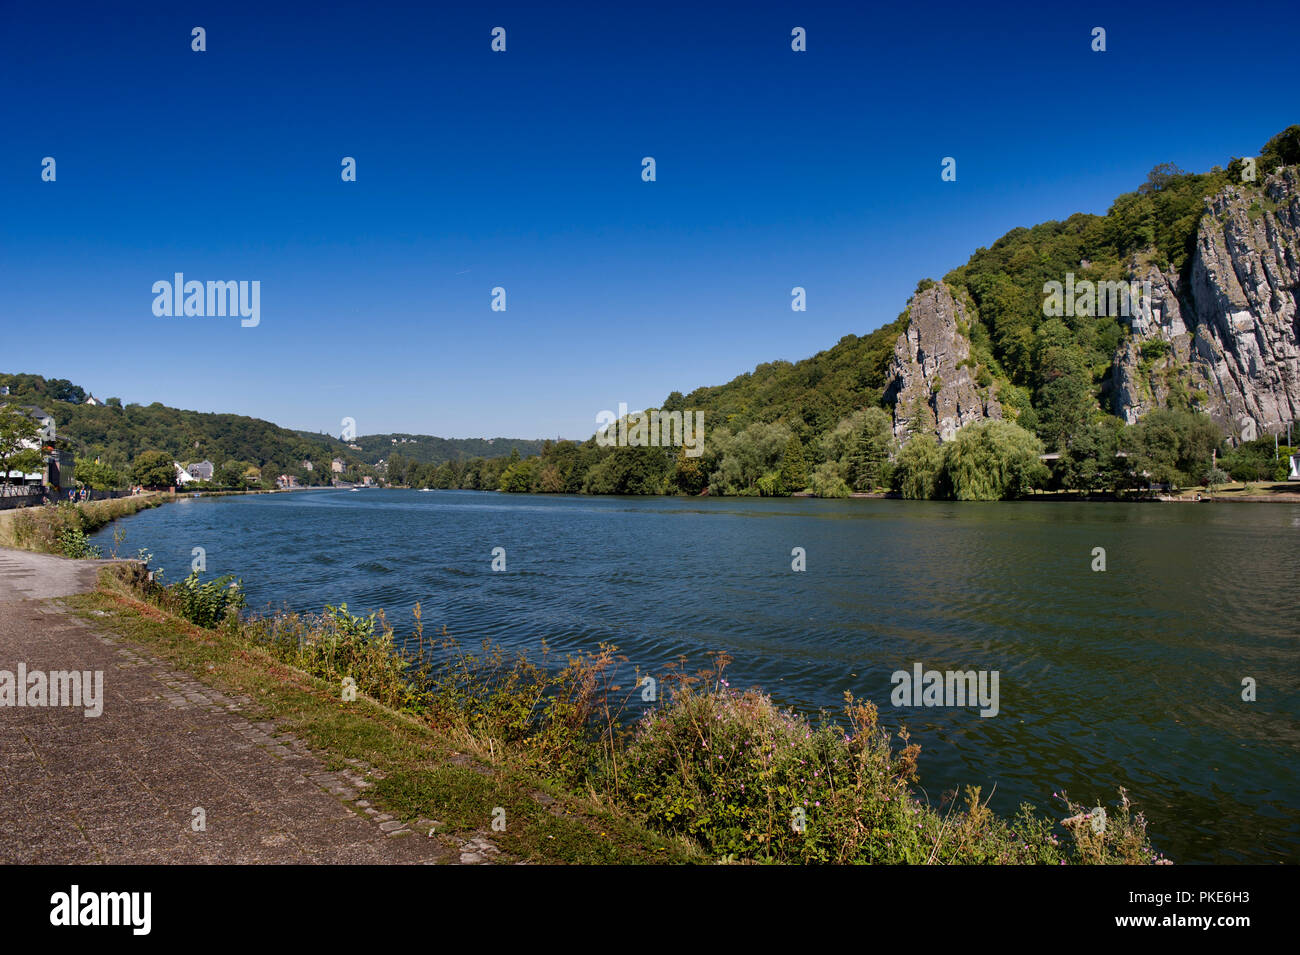 The Promenade de Meuse road along the Meuse river and the Rocks of Néviau in Wepion, south of Namur (Belgium, 05/09/2013) Stock Photo